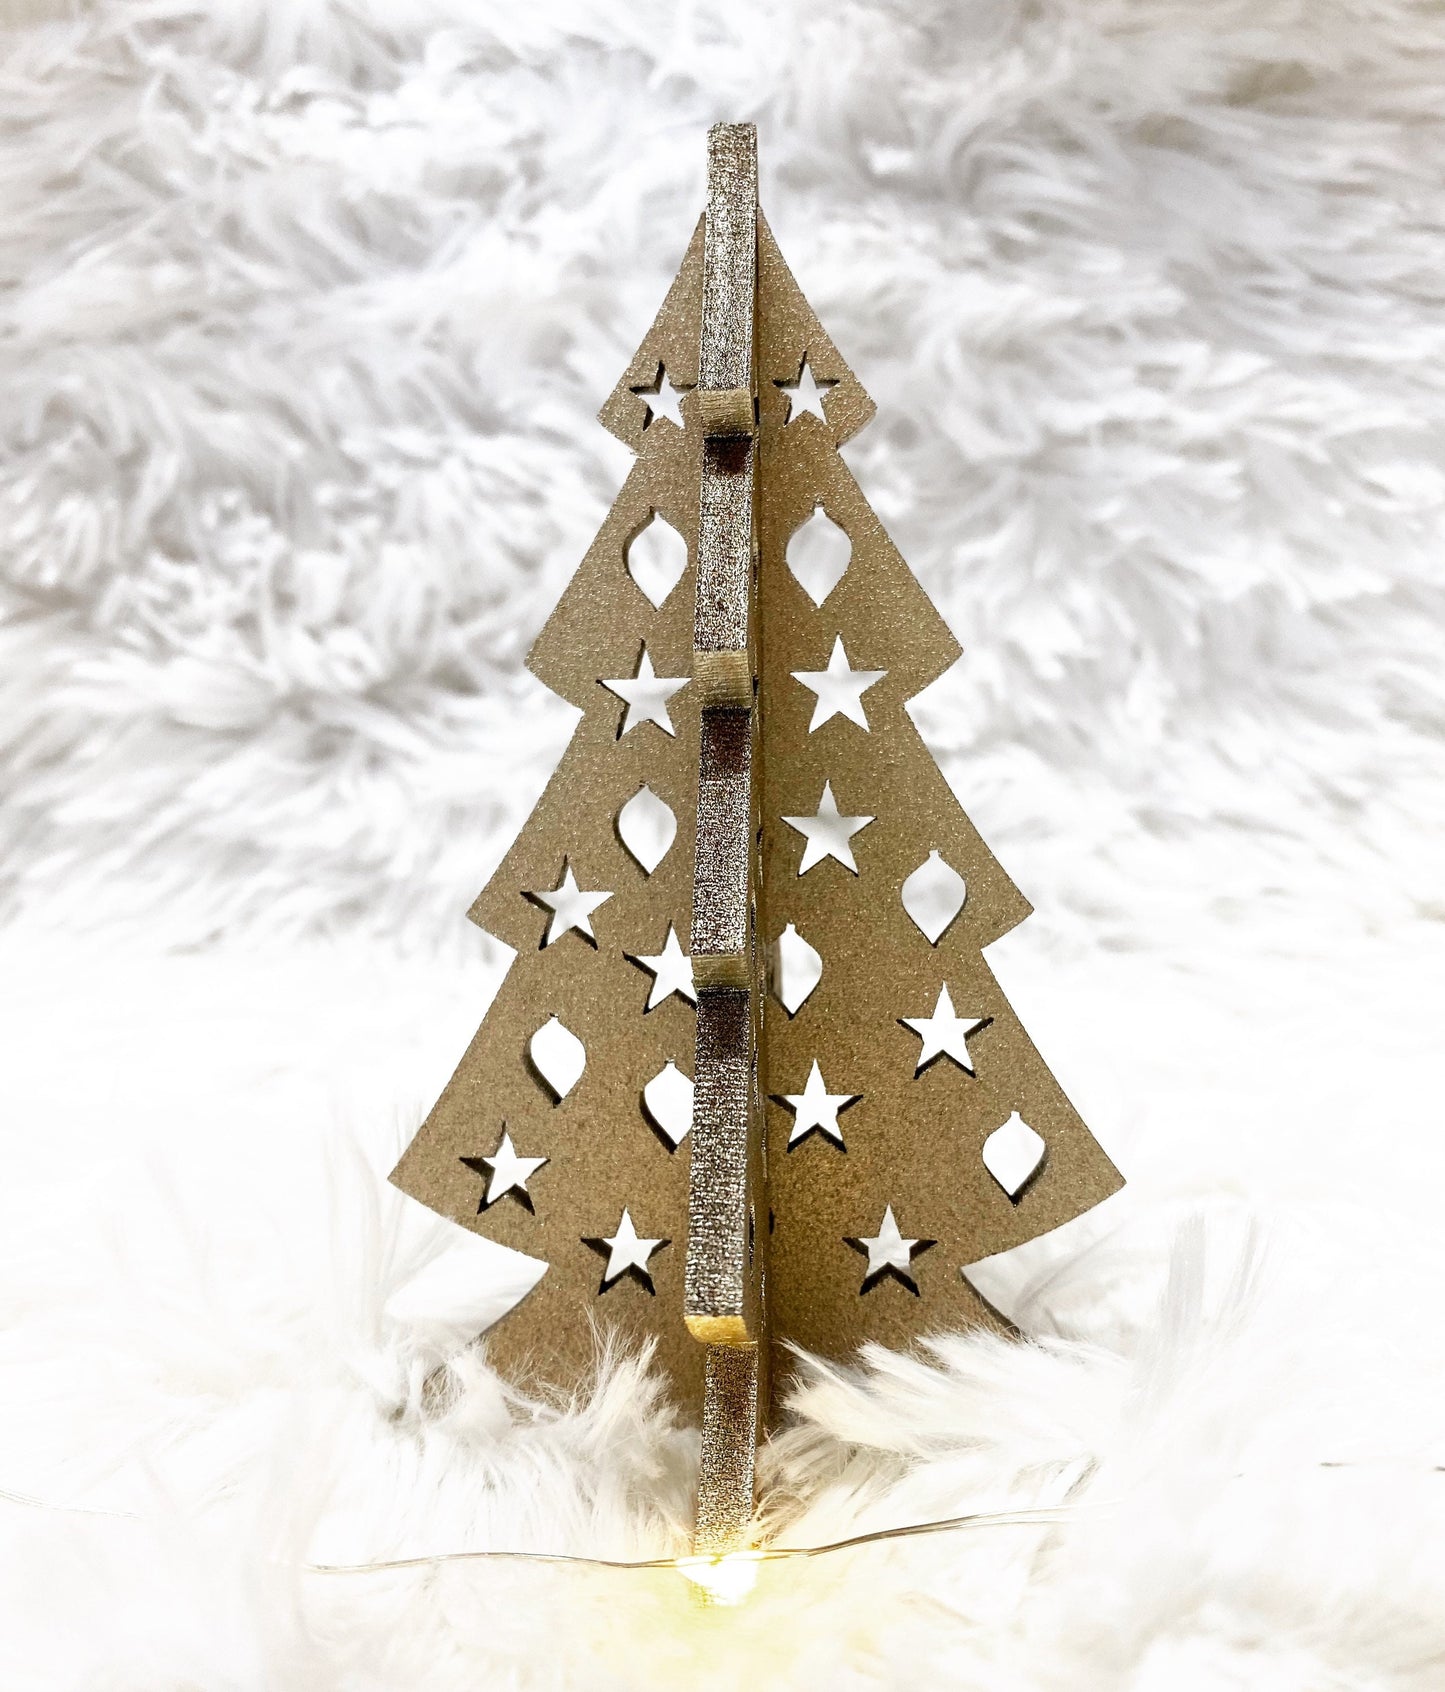 Christmas Tiered Tray Tree, Small Gold Christmas Tree, Wood Christmas Tree, 3D Wood Cut Christmas Tree, Wood Holiday Tiered Tray Tree